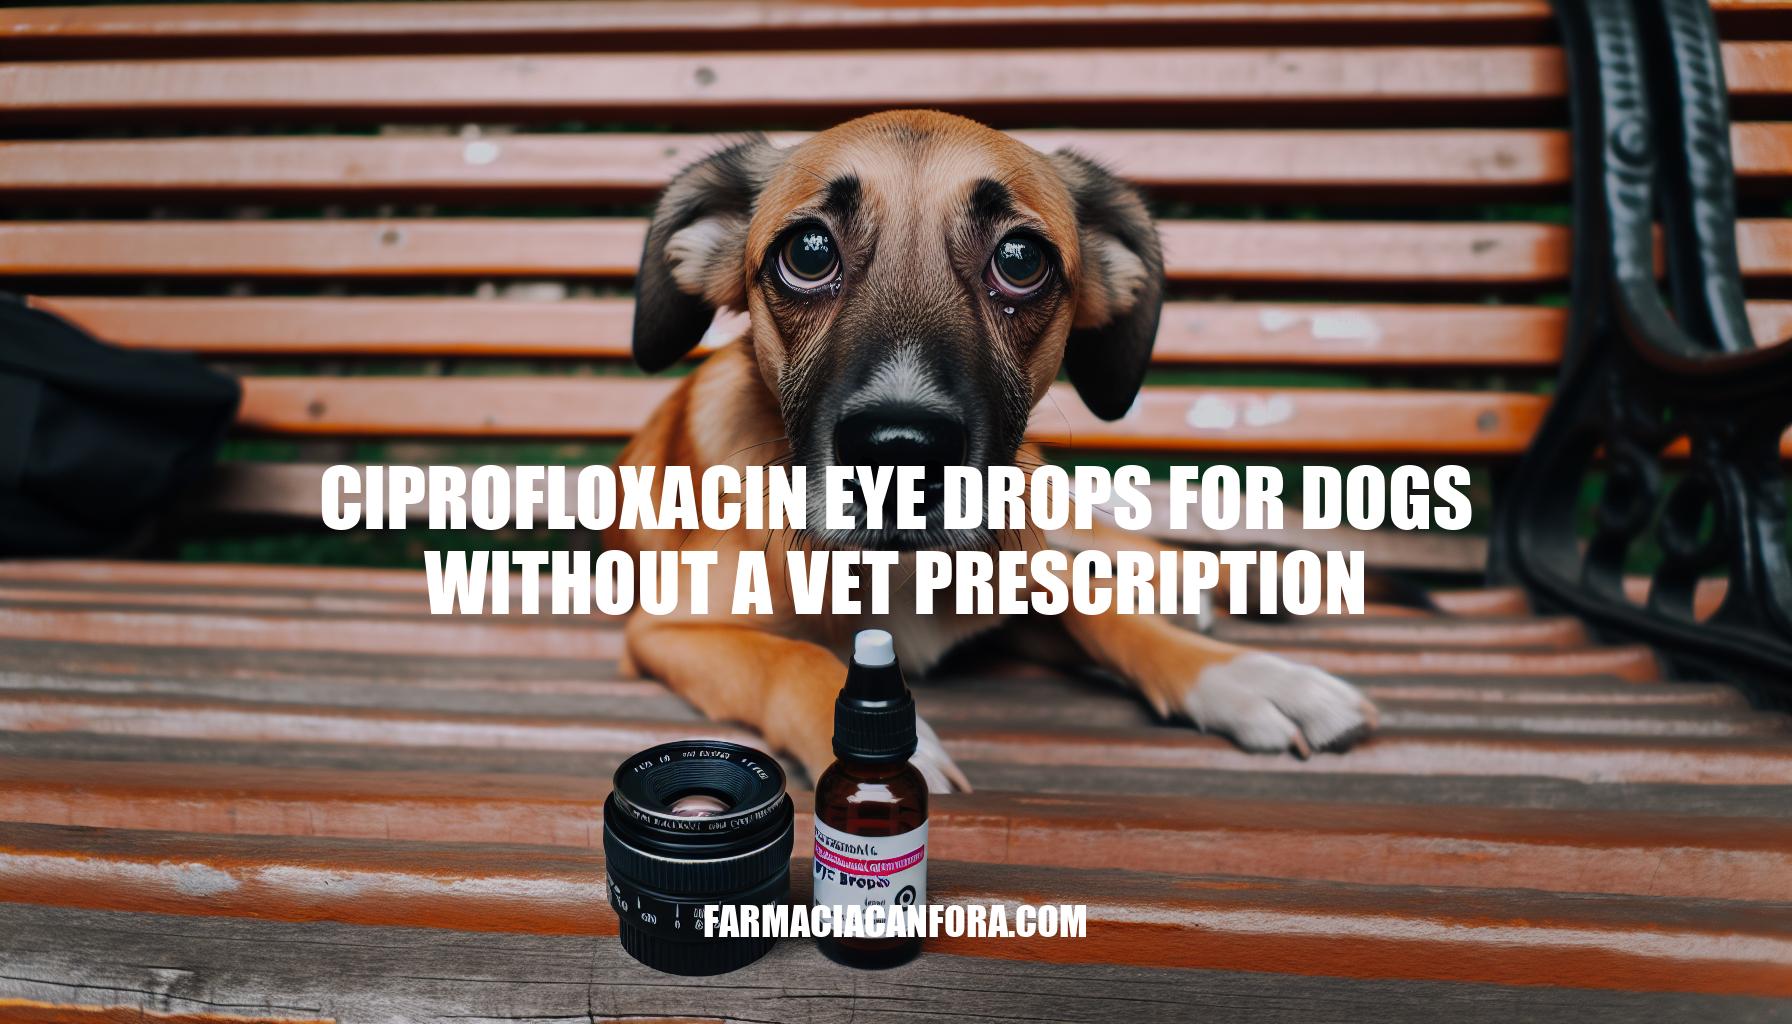 Ciprofloxacin Eye Drops for Dogs Without a Vet Prescription: What You Need to Know